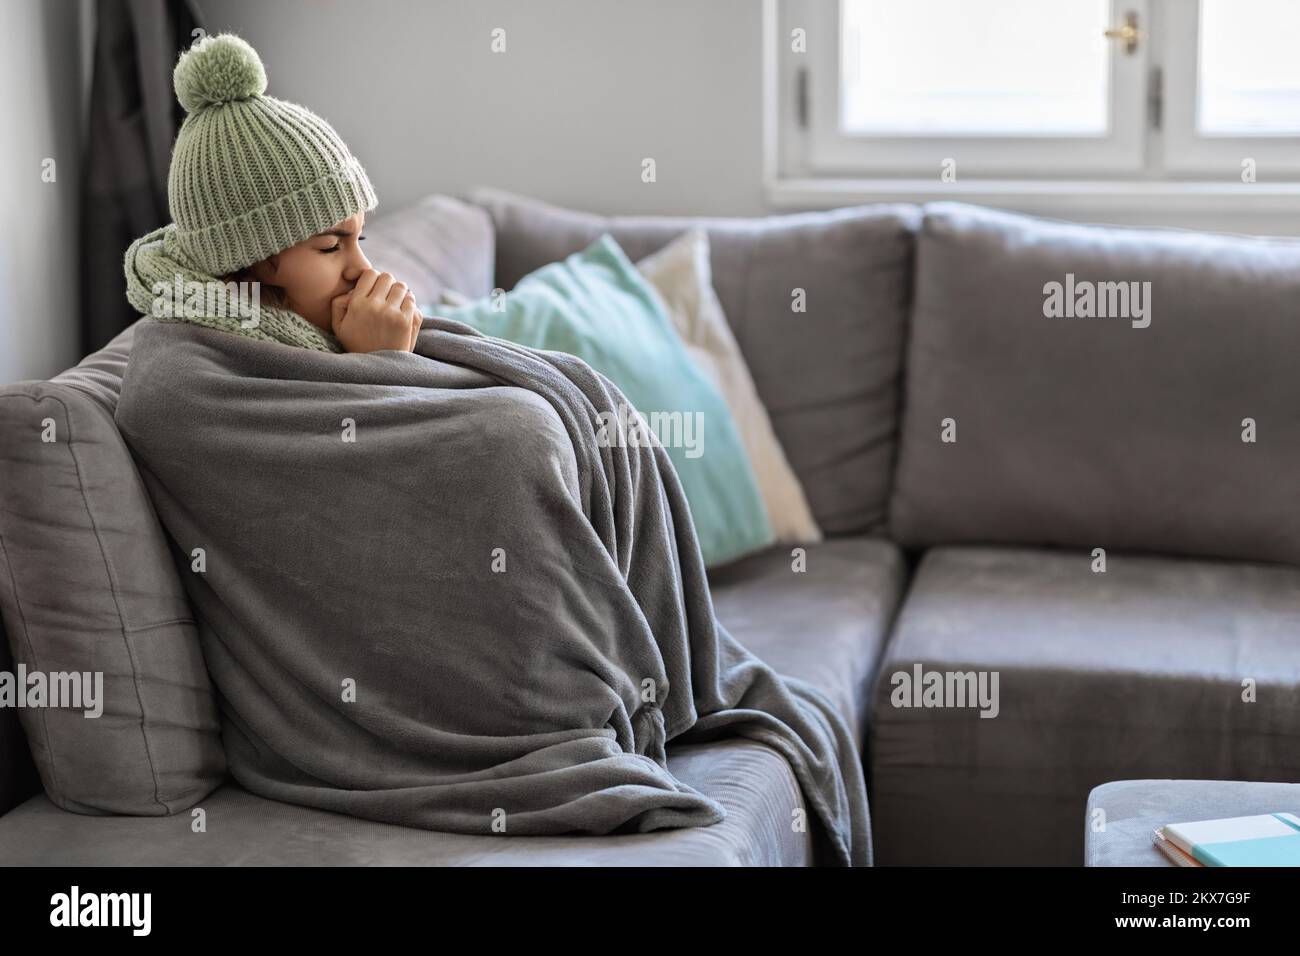 Energy Crisis. Portrait Of Woman Covered In Warm Blanket Sitting On Couch Stock Photo